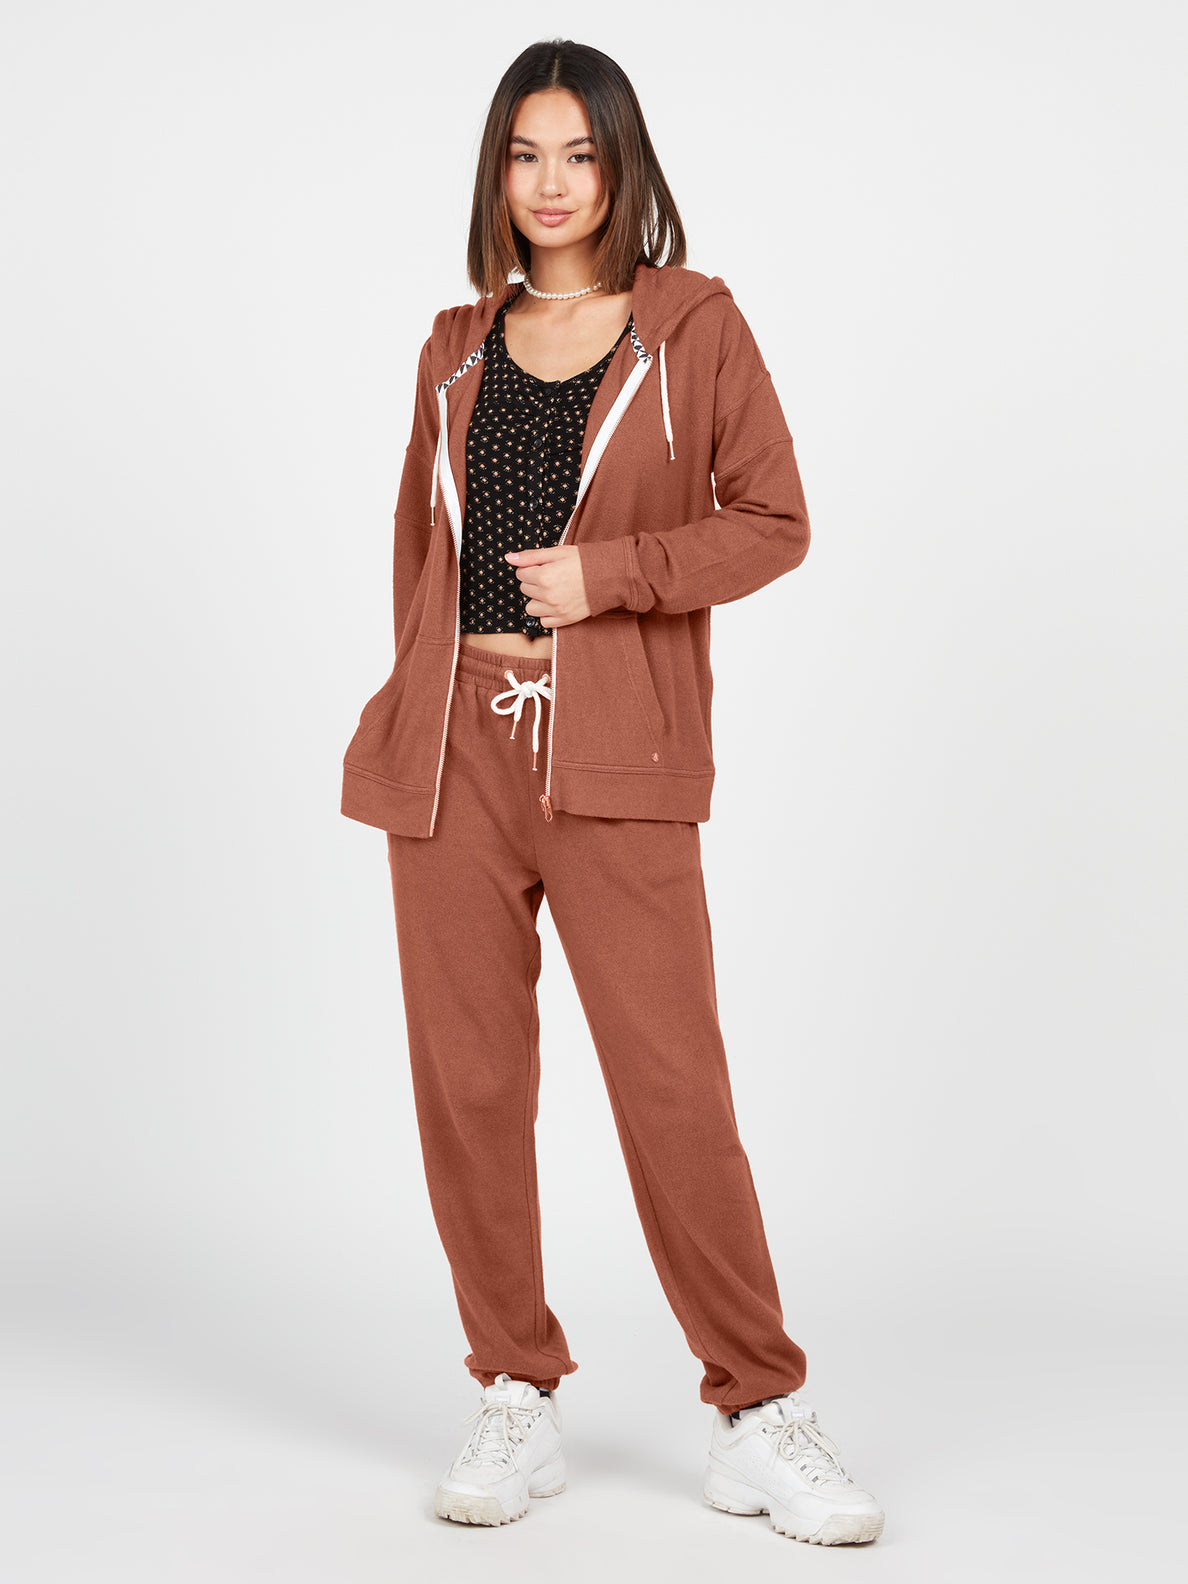 Lived In Lounge Fleece Pants - Dark Clay (B1232208_DCL) [F]